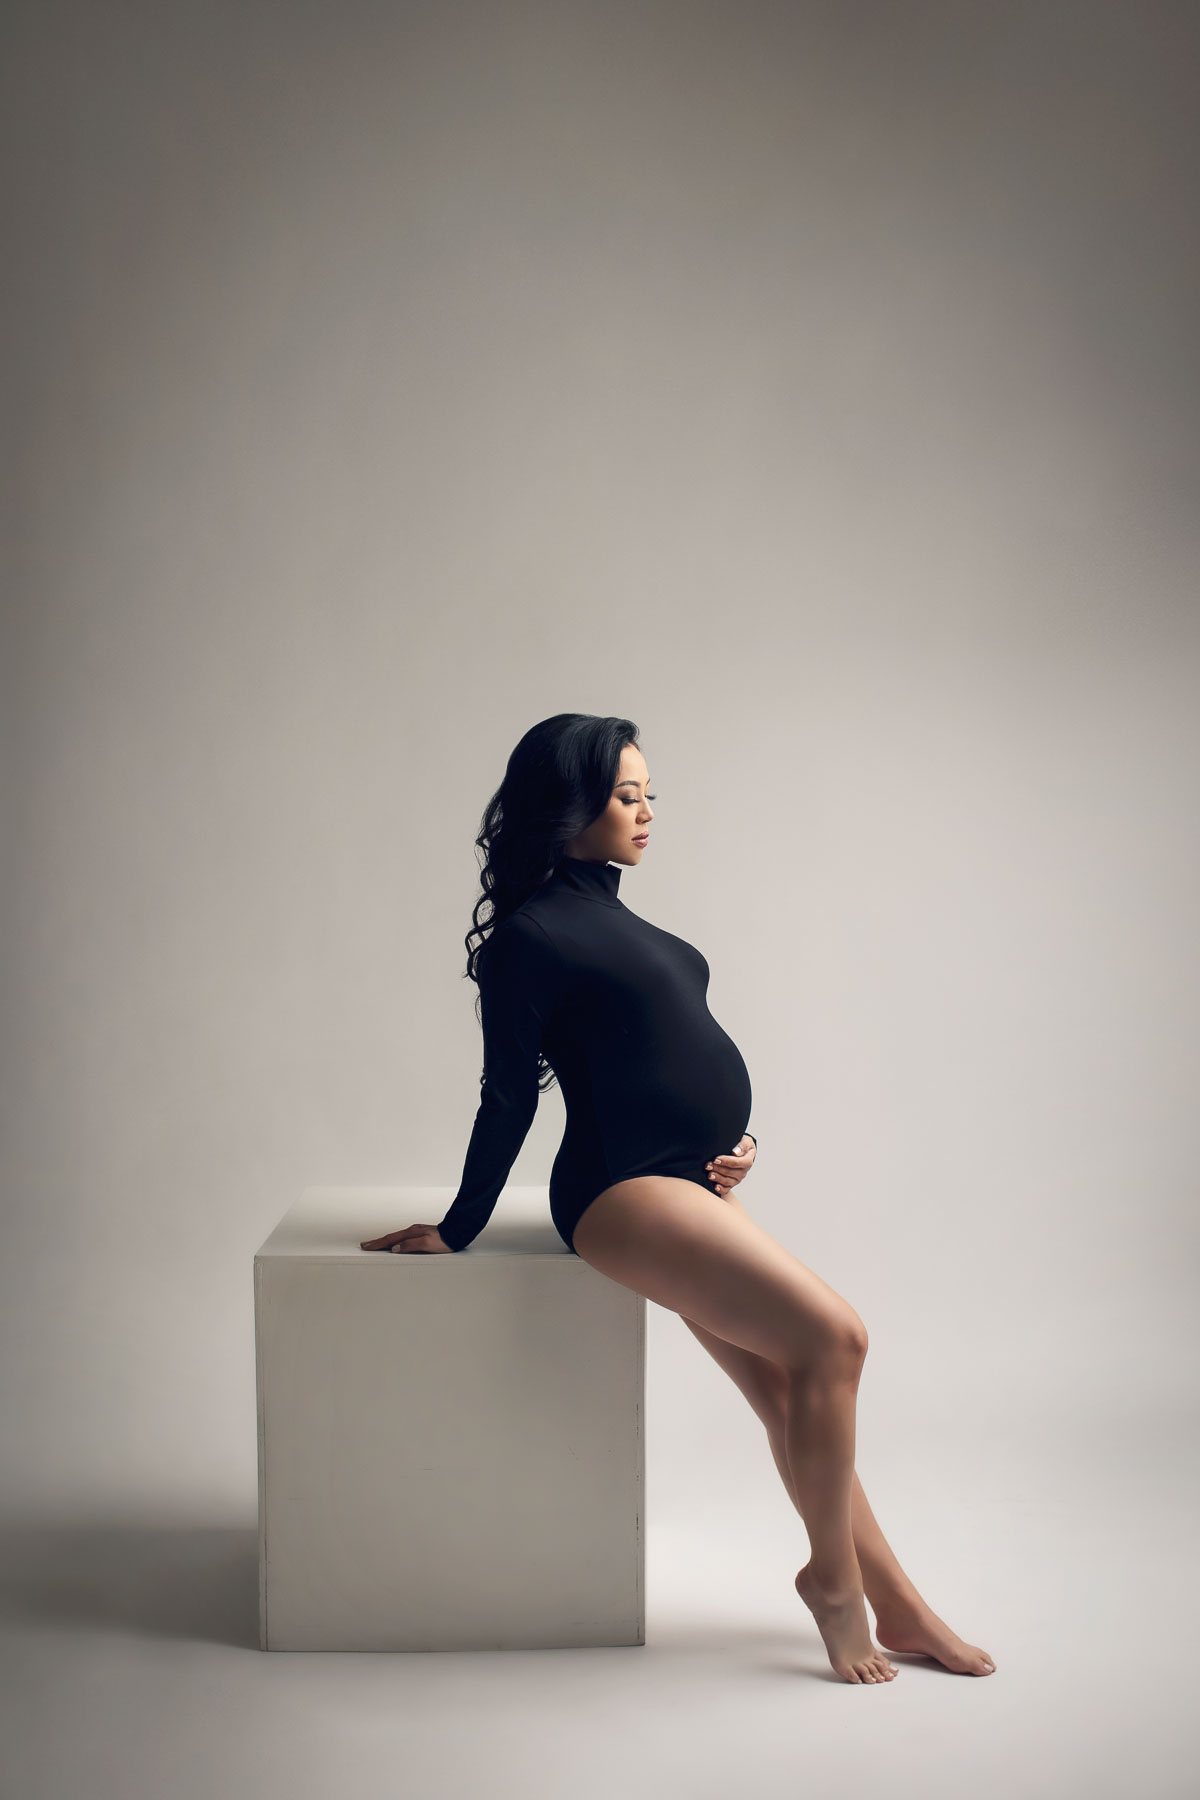 Best pregnancy photo in Vancouver with Maternity BODYSUIT for photoshoot in black artistic and edgy look